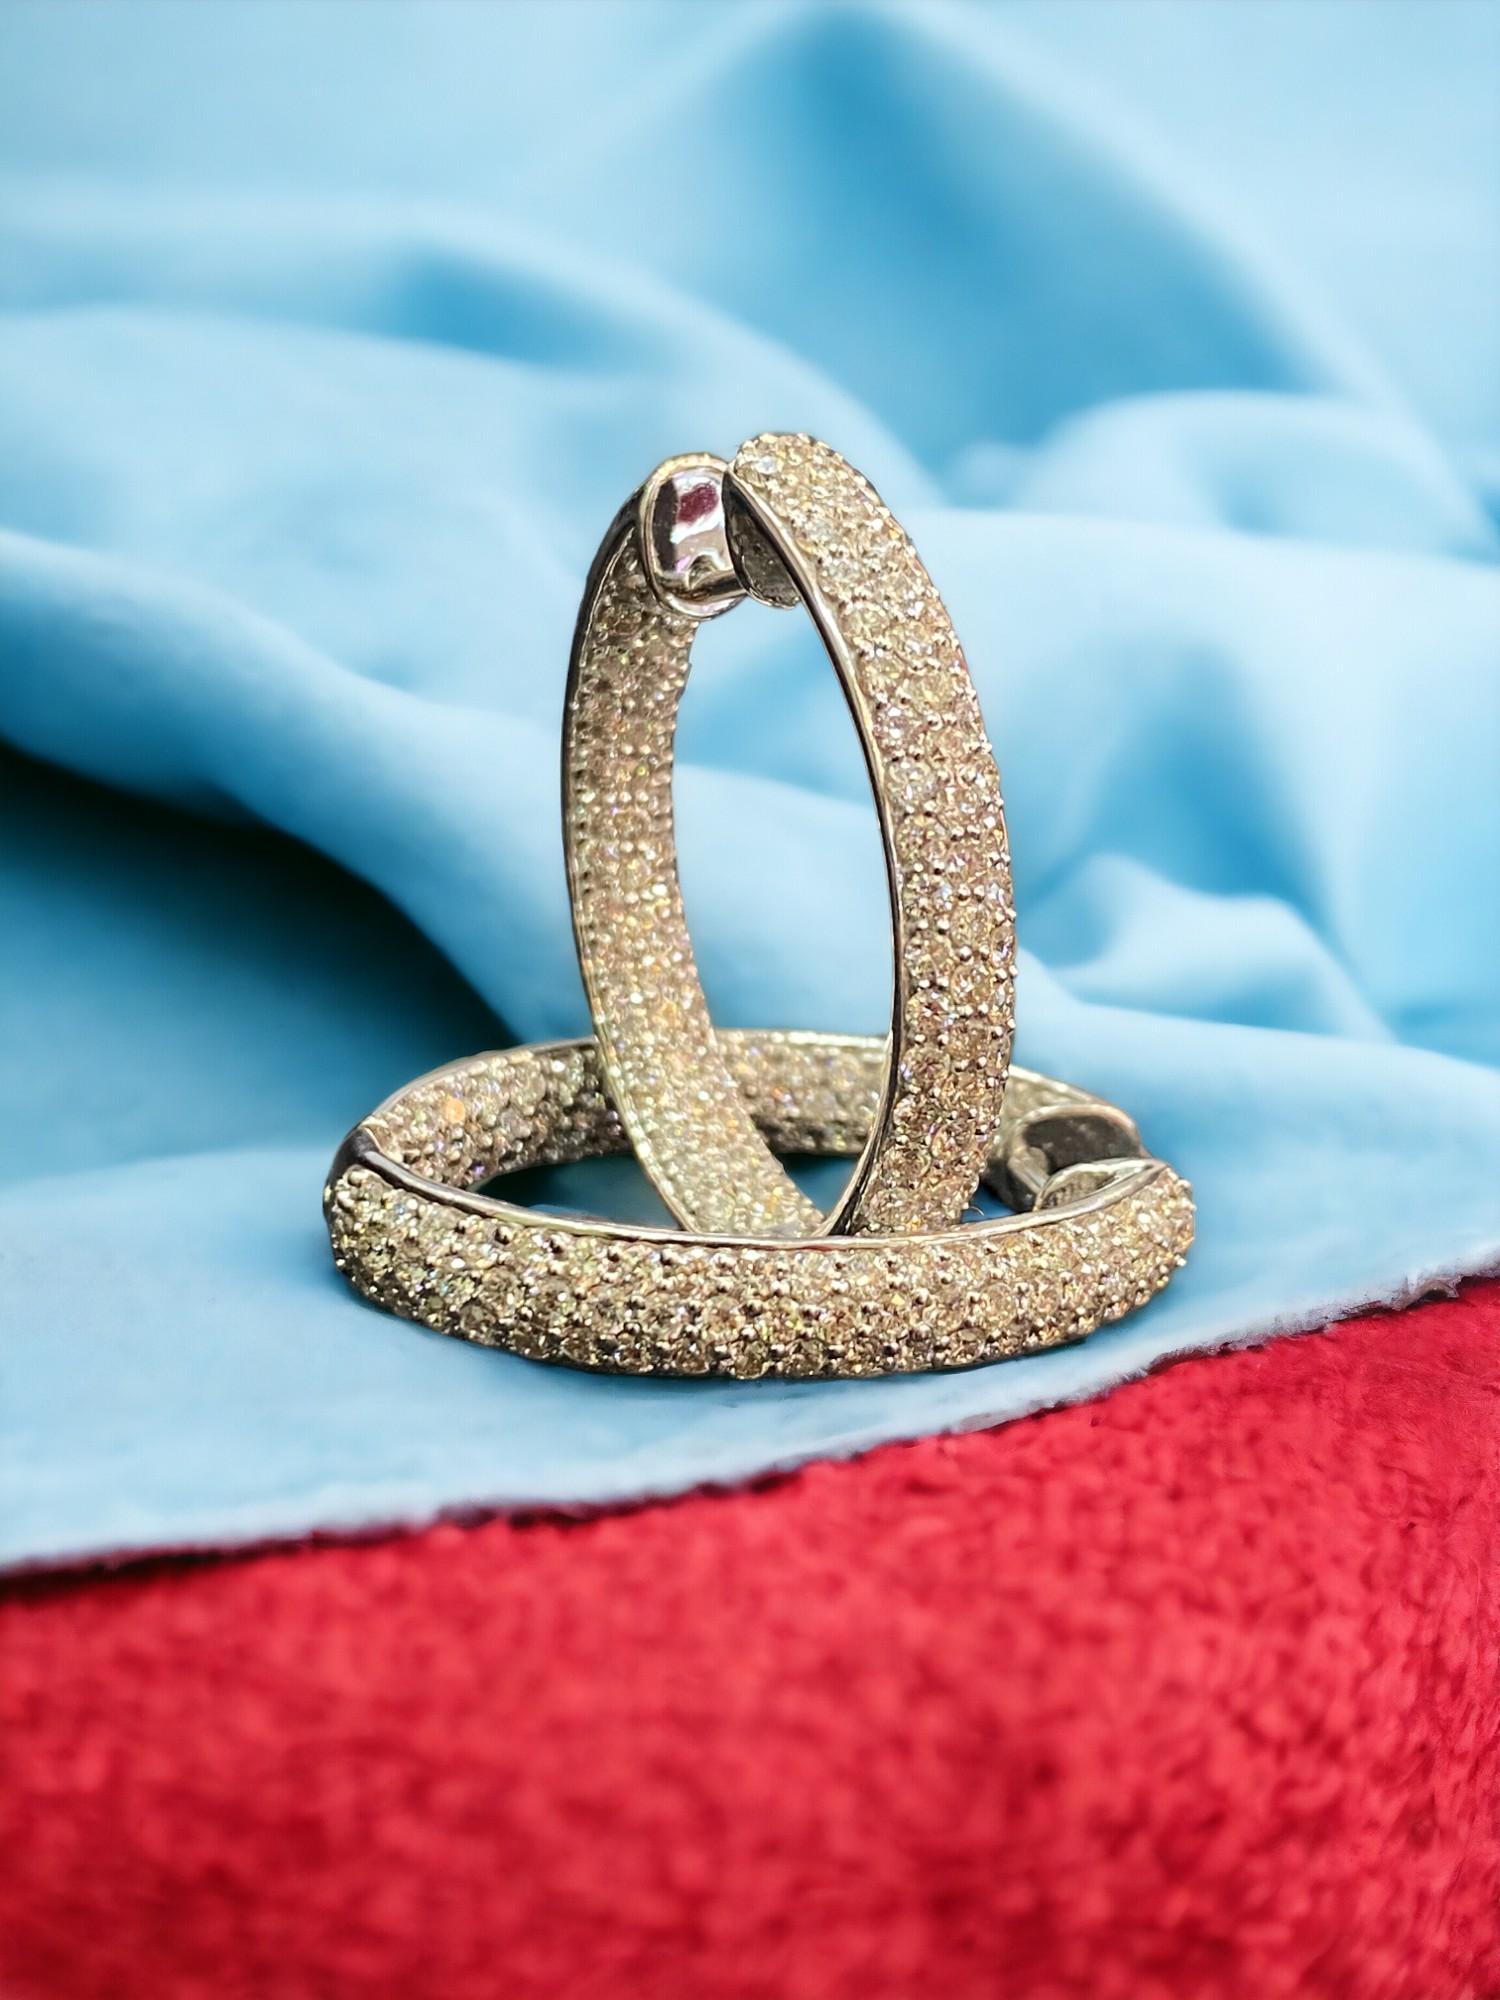 Treat yourself to this stunning piece of jewelry: a pair of hoop earrings adorned with 2.90 carats of dazzling diamonds in 14 carat pure gold!

Specifications :

Diamond Weight : 2.90 Carats
Diamond Shape : Round
Diamond Color Grade : F
Diamond